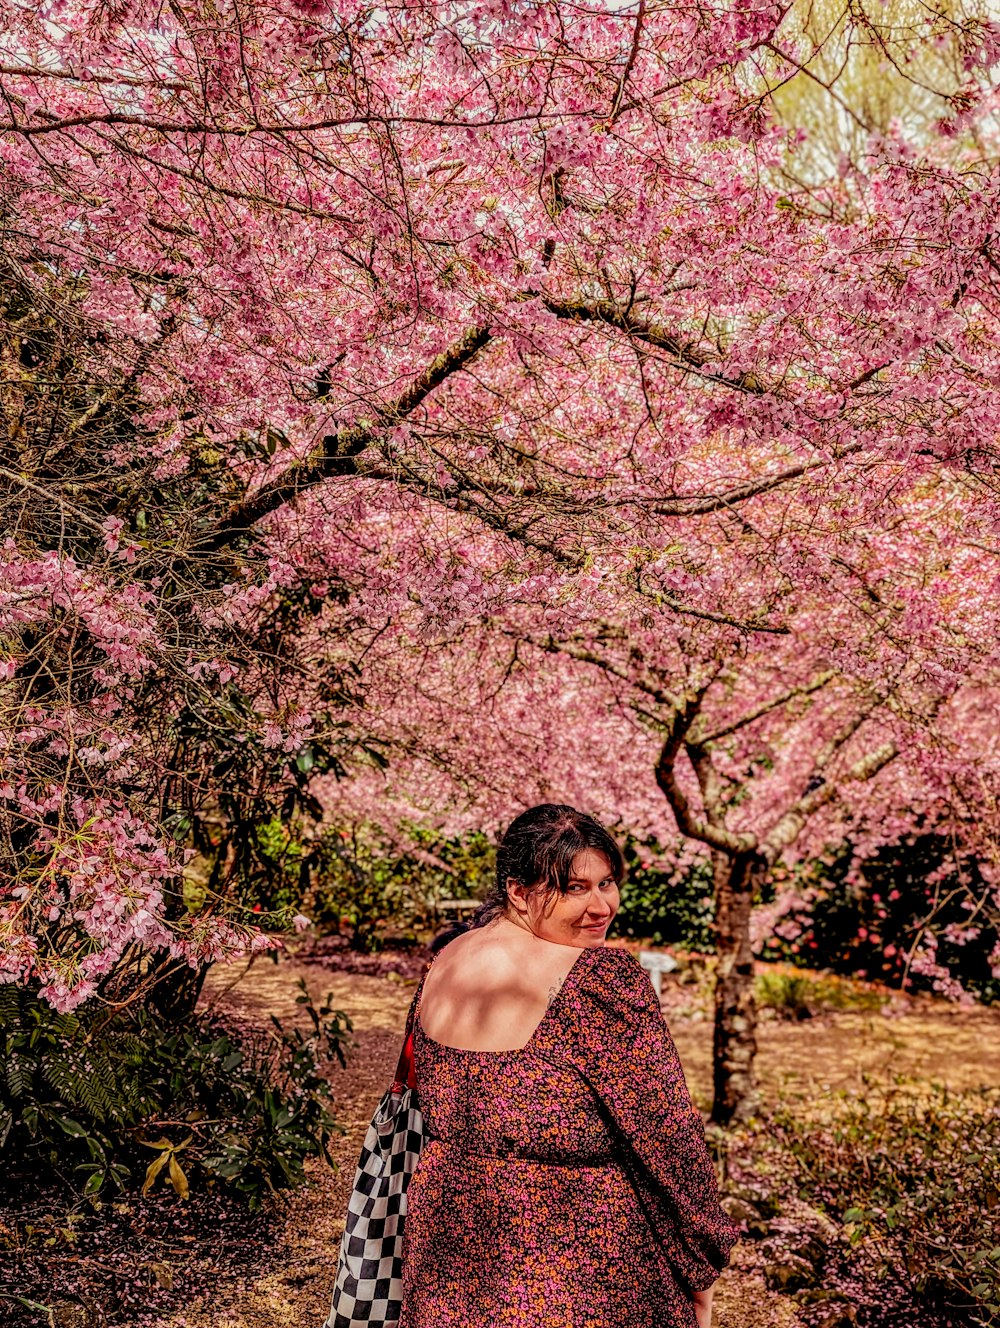 a woman in a dress is walking under a tree with pink flowers